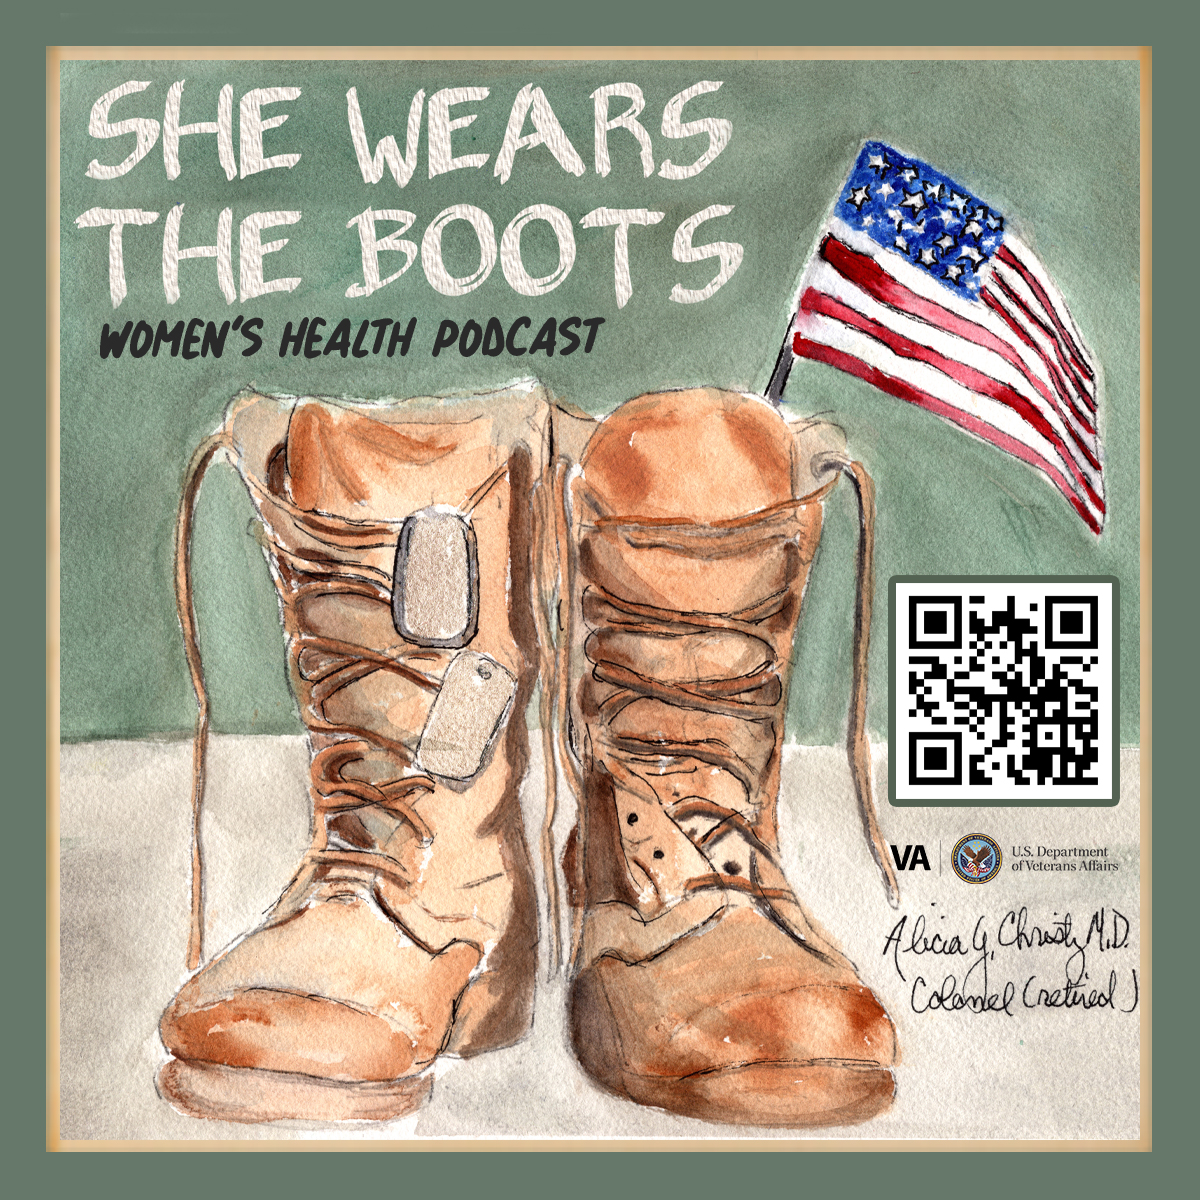 Trouble falling or staying asleep? You may have insomnia. Listen to this She Wears the Boots episode to learn about the symptoms and impacts of insomnia on women Veterans and VA’s treatment options: 🎧bddy.me/3T9Q2g0.